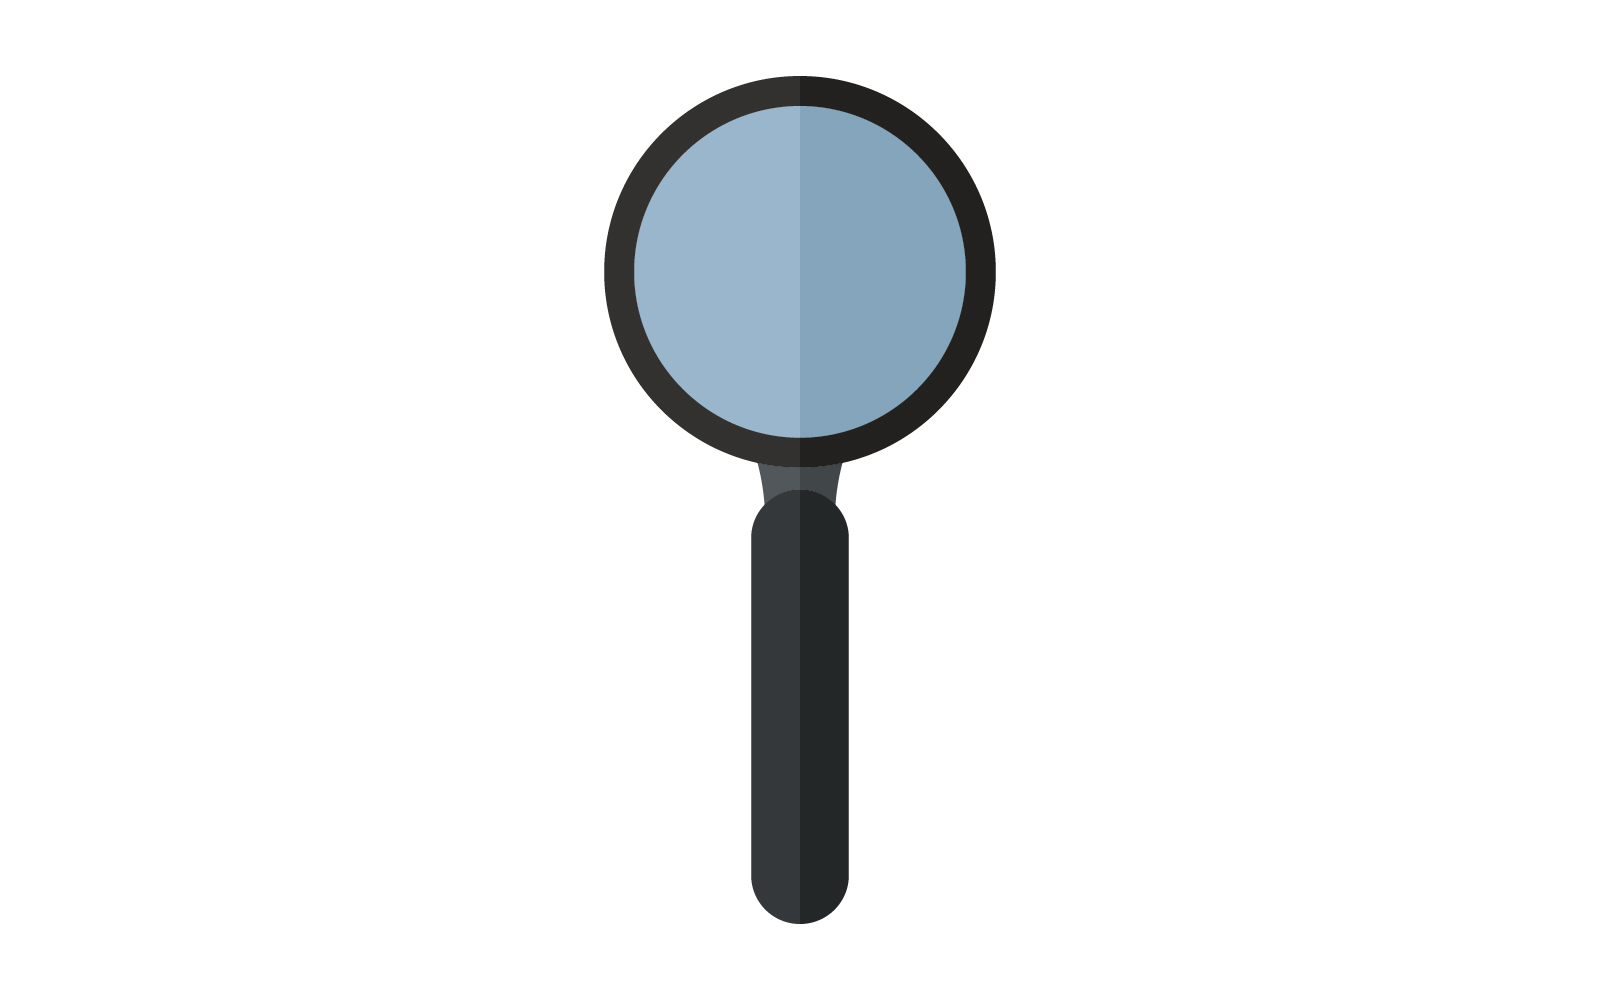 Magnifying glass illustrated on a white background